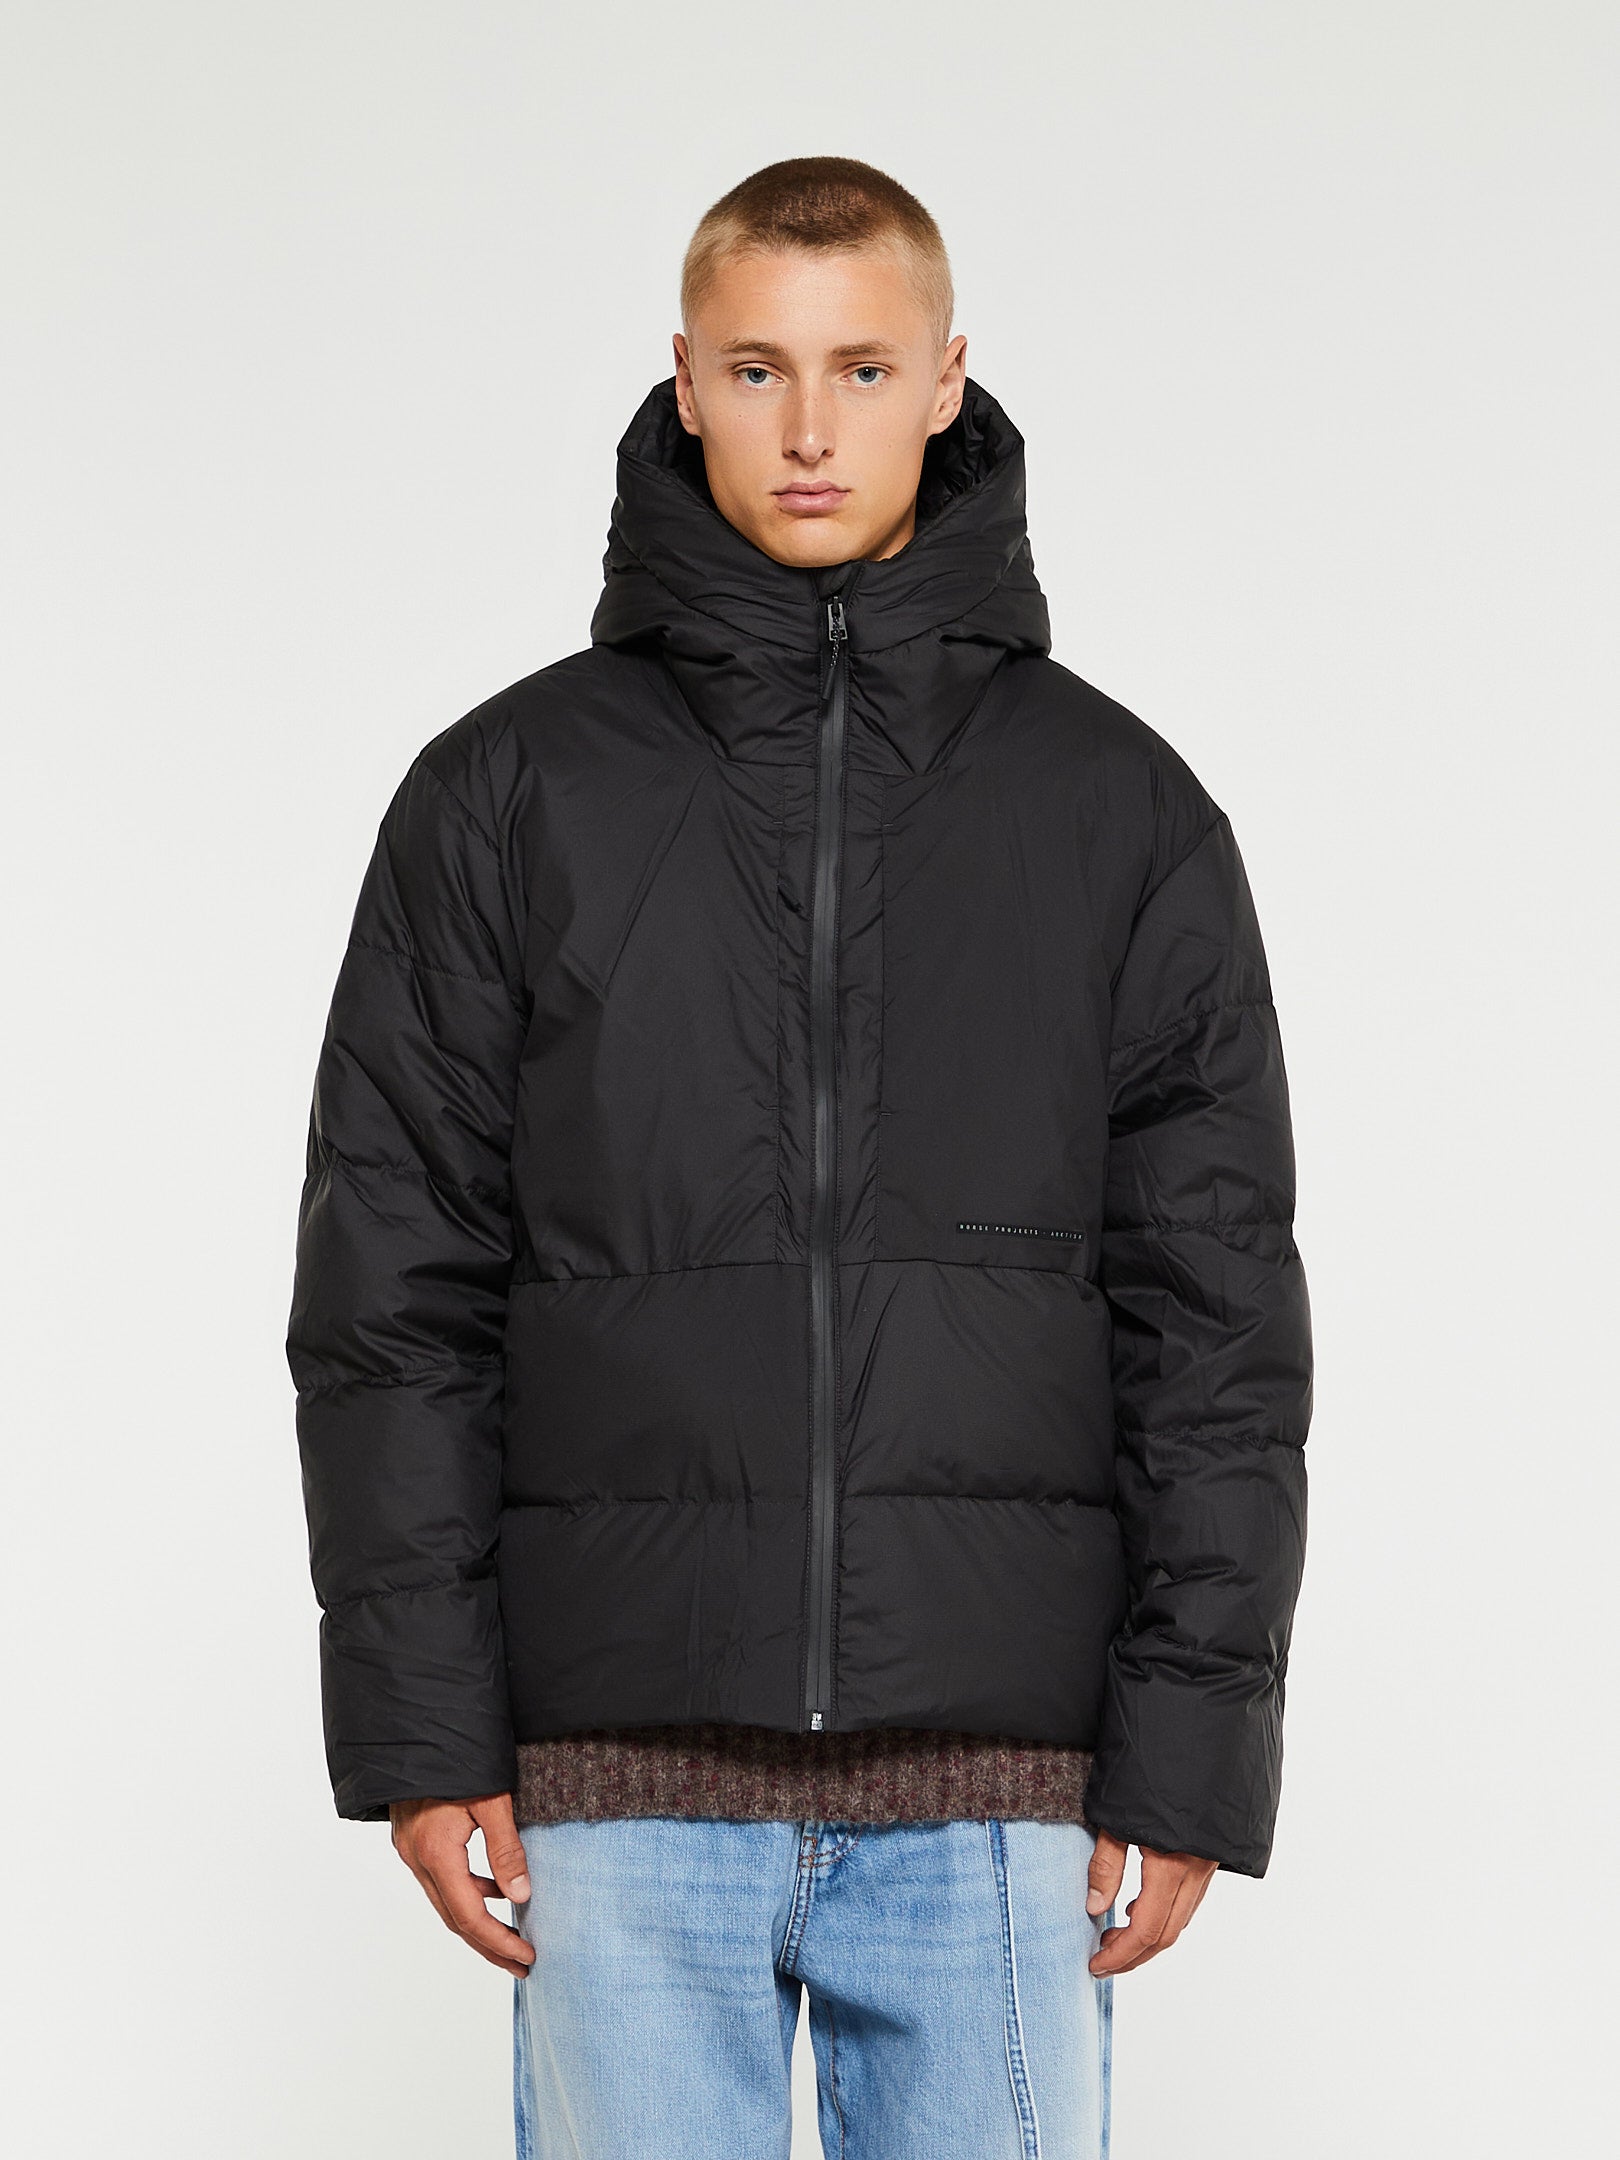 Norse Projects - Asger Pertex Quantum Down Jacket in Black